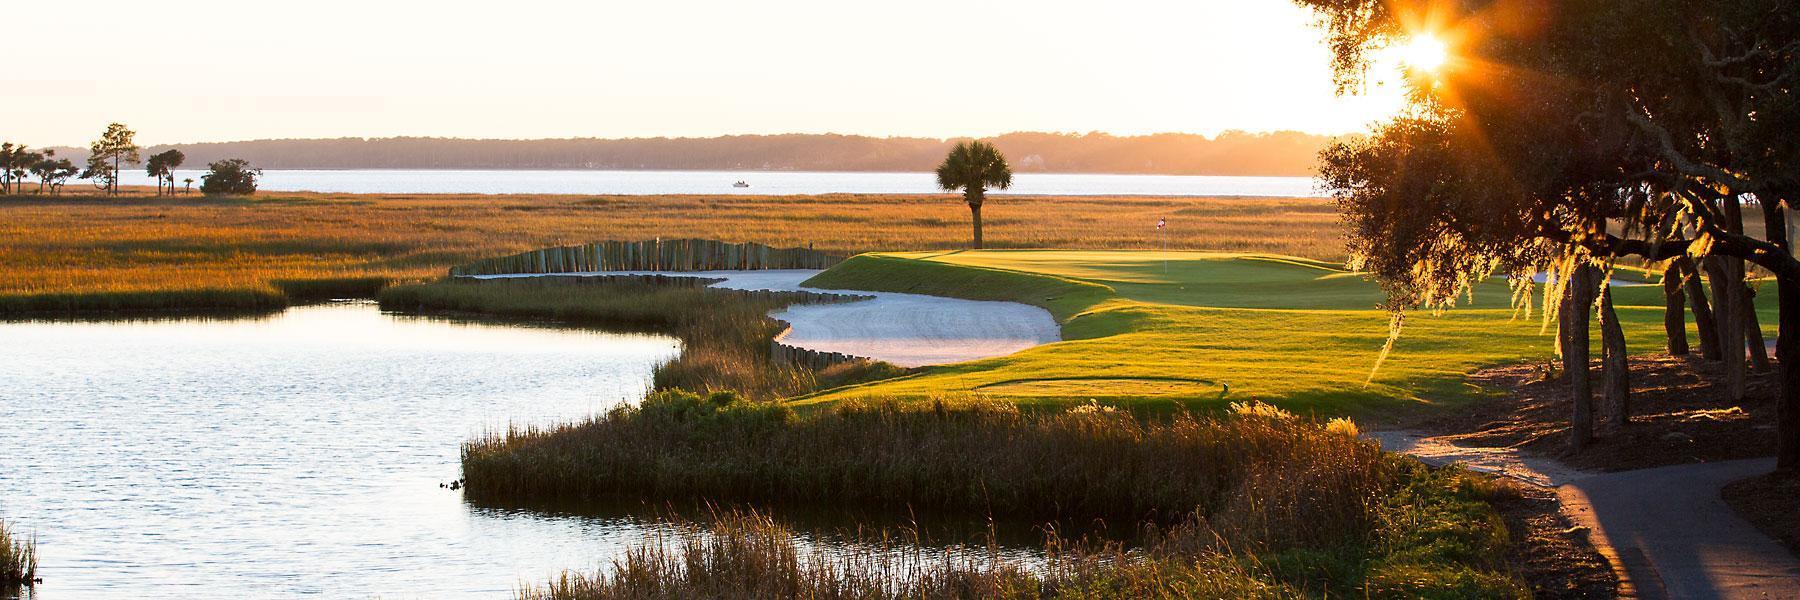 Golf Vacation Package - Play where the Pro's Play at Sea Pines Resort!